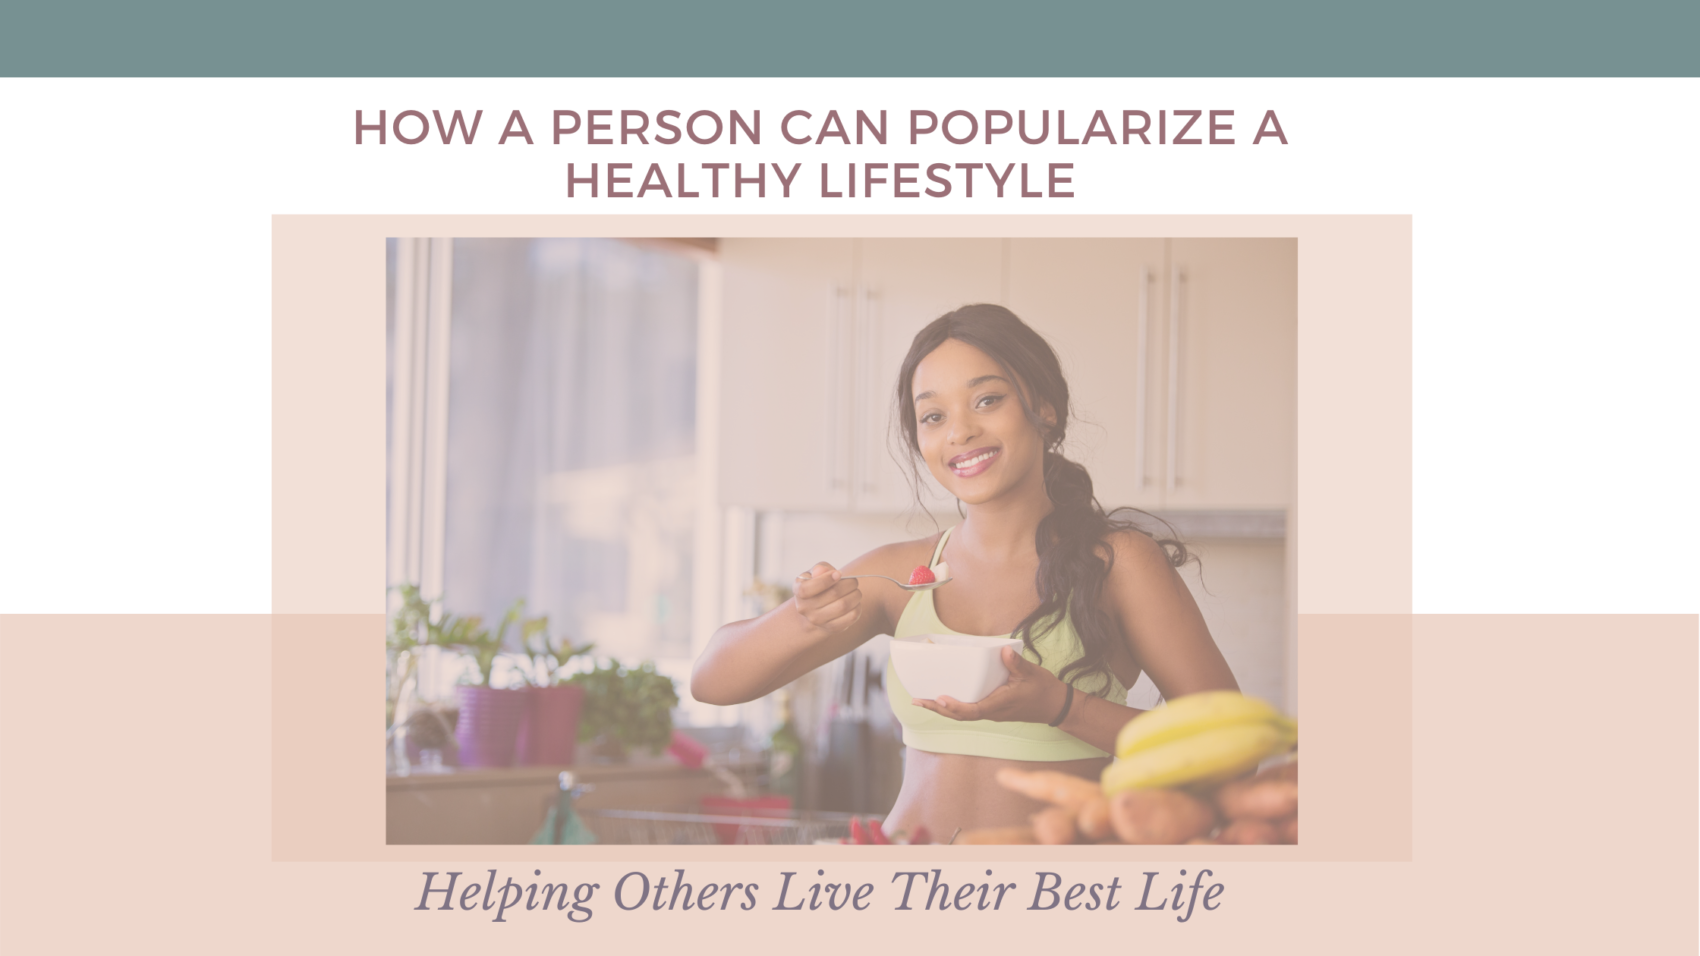 How one person can popularize a healthy lifestyle